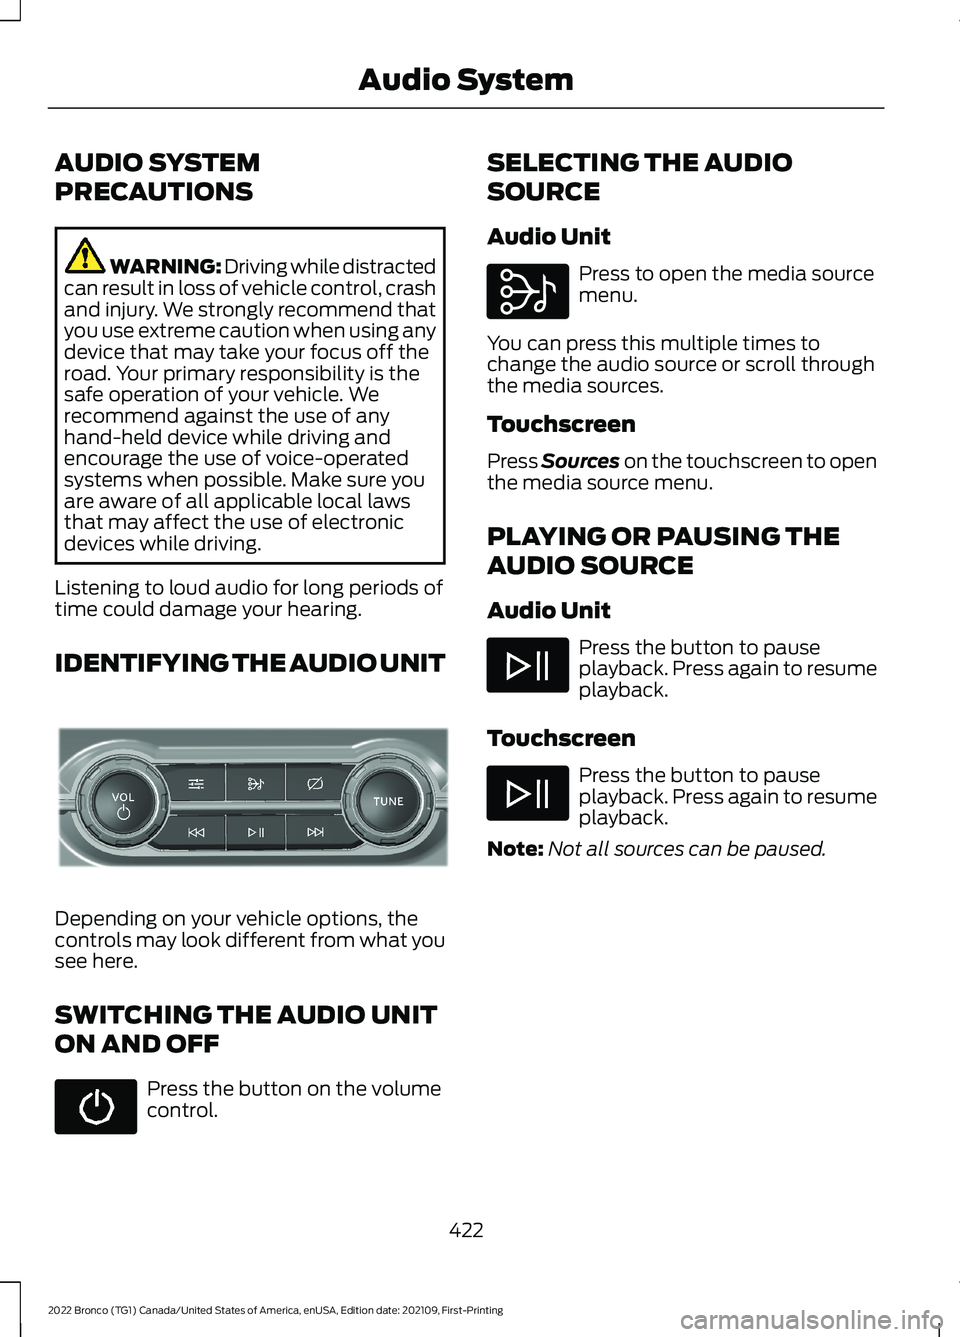 FORD BRONCO 2022 Owners Guide AUDIO SYSTEM
PRECAUTIONS
WARNING: Driving while distractedcan result in loss of vehicle control, crashand injury. We strongly recommend thatyou use extreme caution when using anydevice that may take y